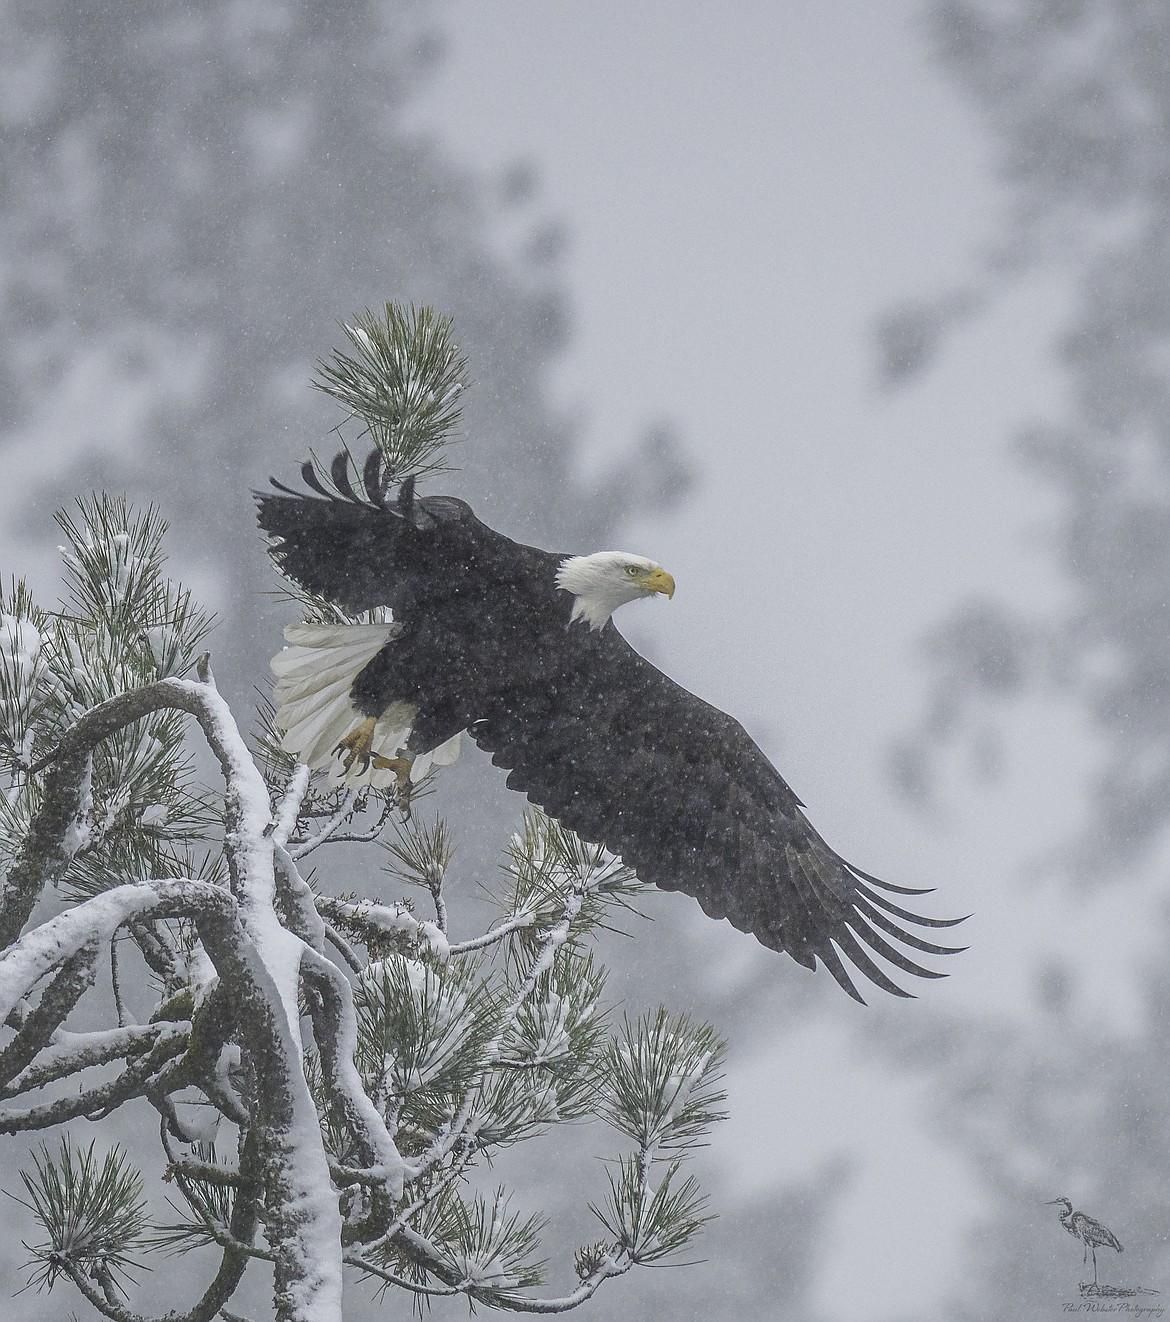 A bald eagle takes off into a windy snowstorm on Nov. 7 at Higgens Point.